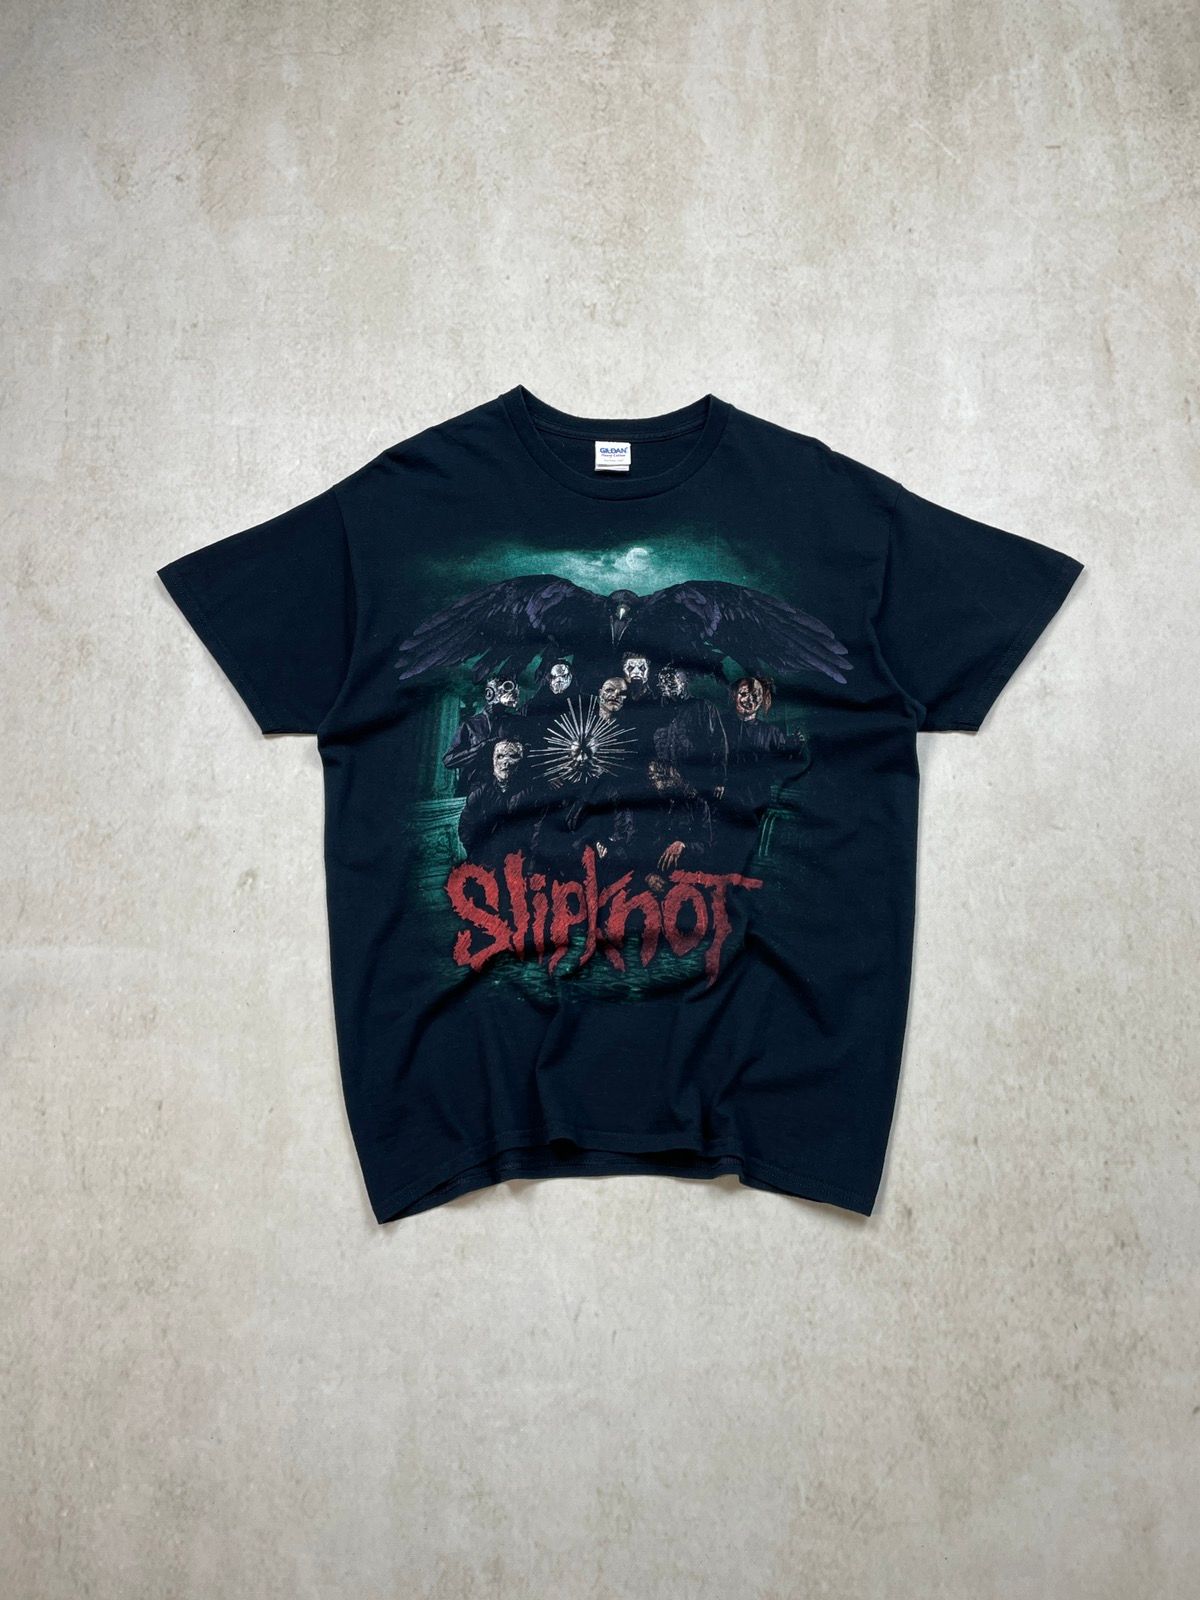 Pre-owned Band Tees X Rock T Shirt Vintage Slipknot Crow Prepare For Hell World Tour 14s In Black